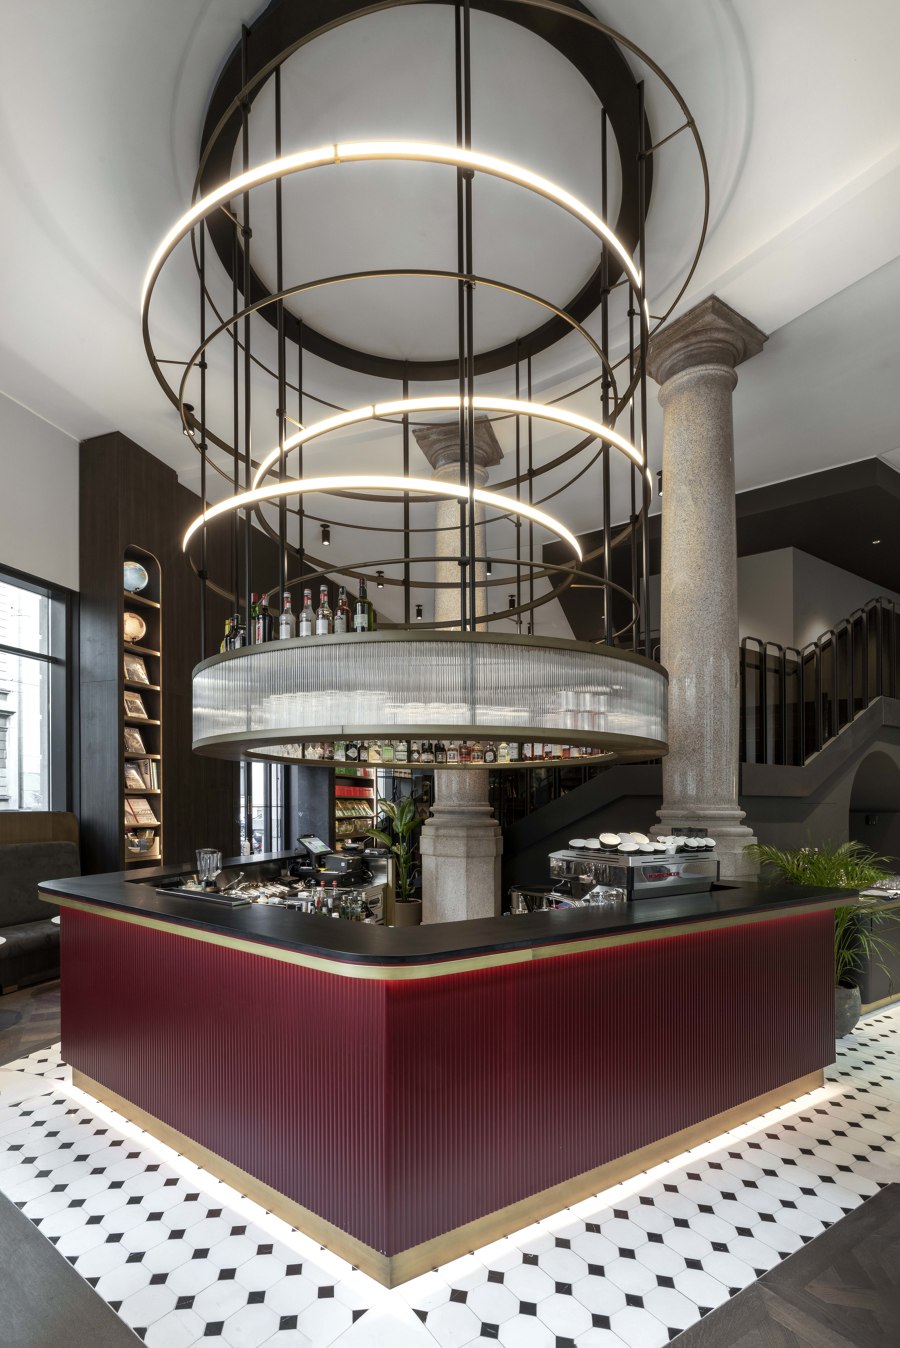 Radisson Collection Hotel, Palazzo Touring Club Milan by Marco Piva | Hotel interiors